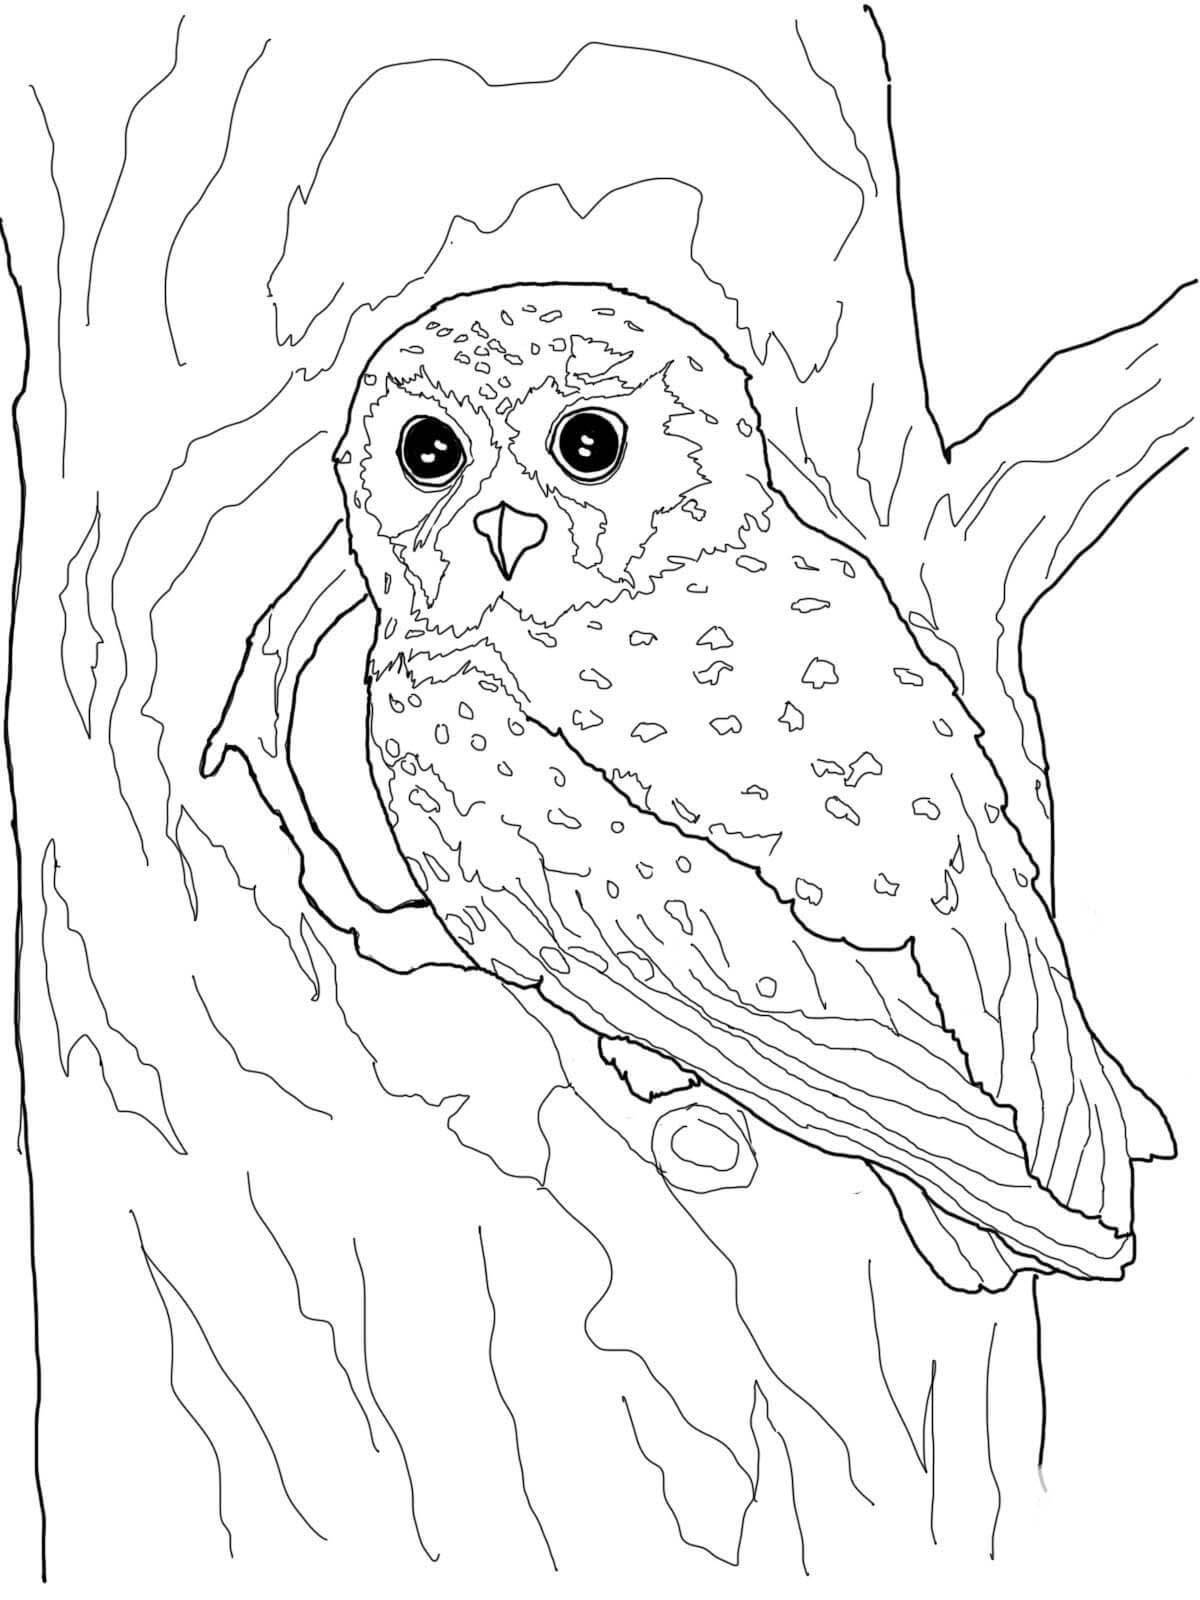 Bianca owl playful coloring page